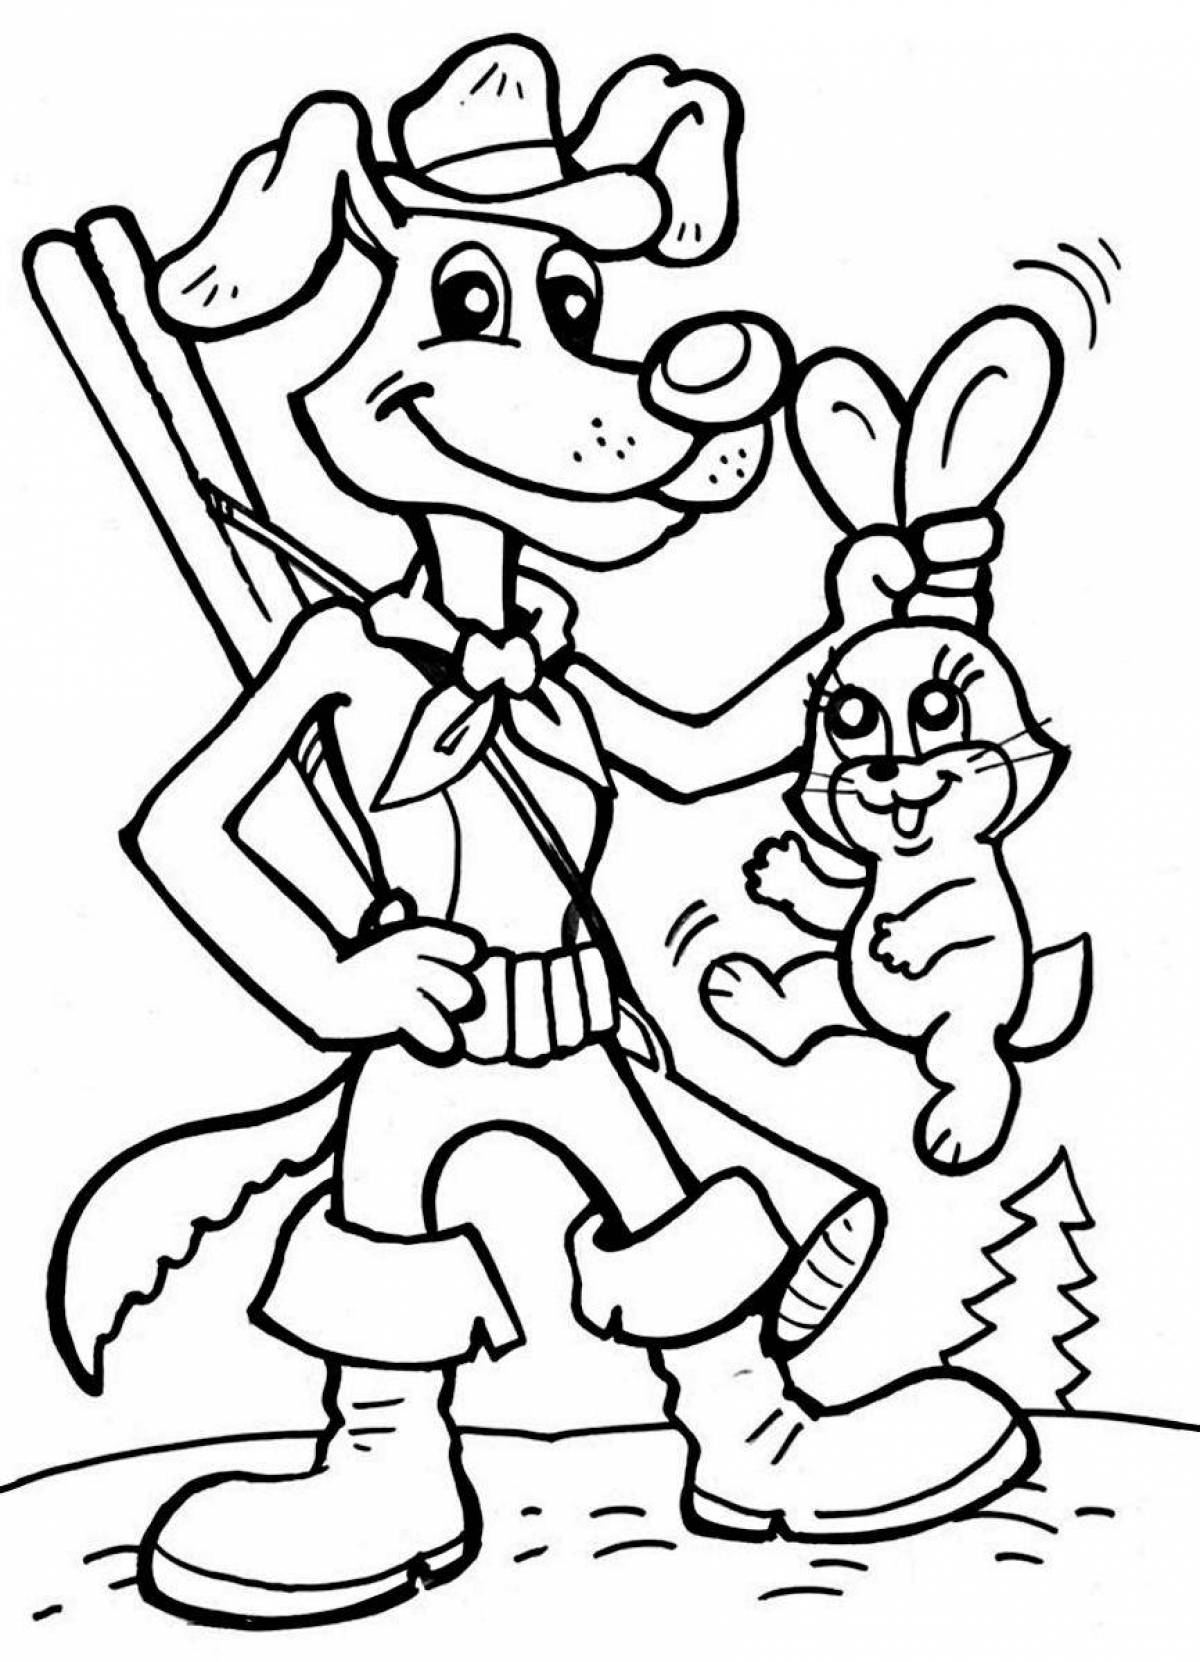 Outstanding sailor skin coloring page for youth